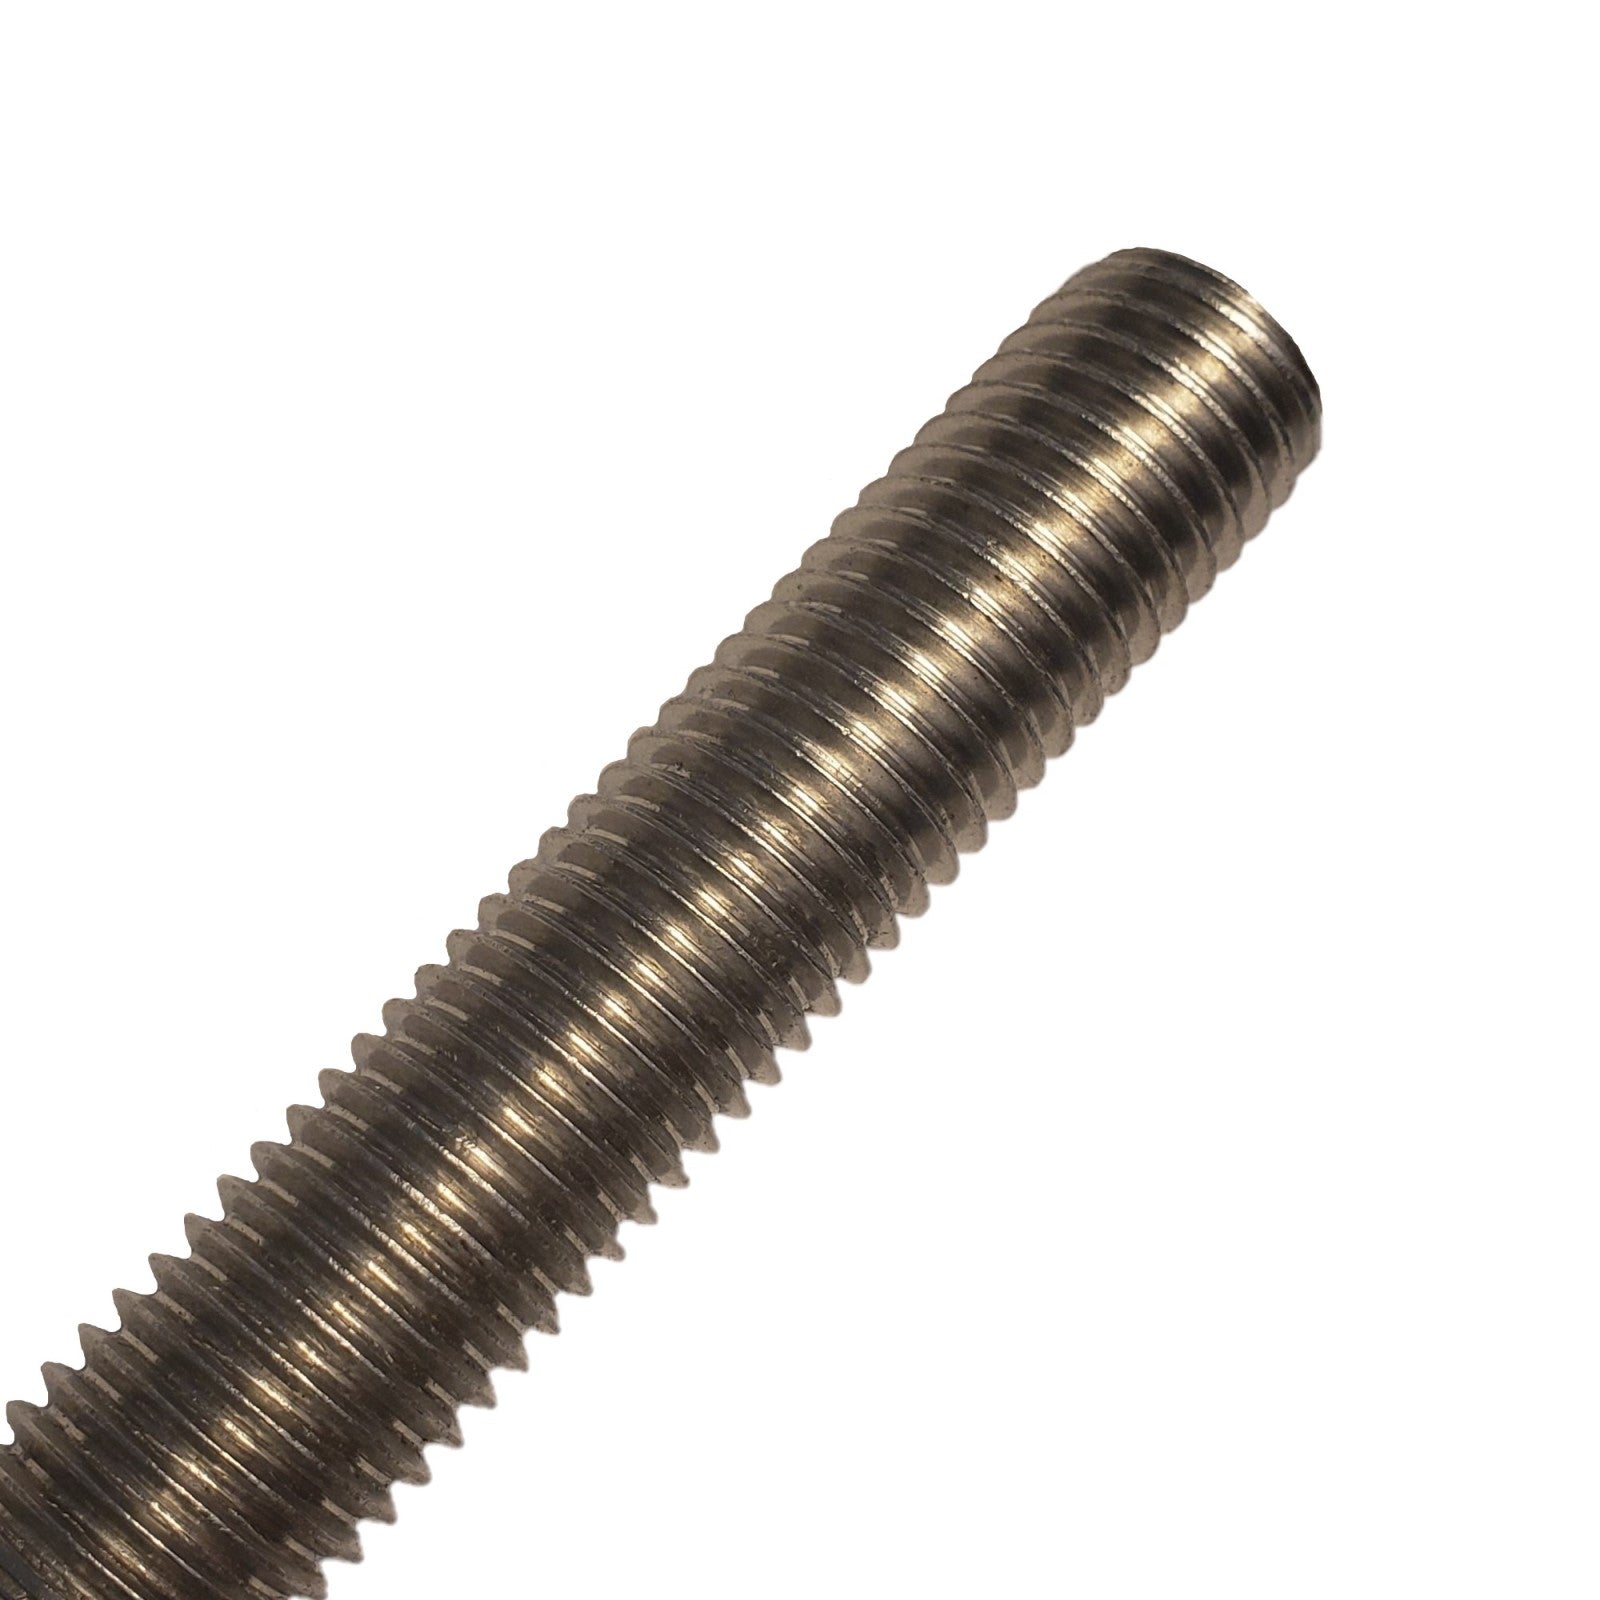 3/8-16 x 1' 316 Stainless Steel Threaded Rod – Fasteners Plus